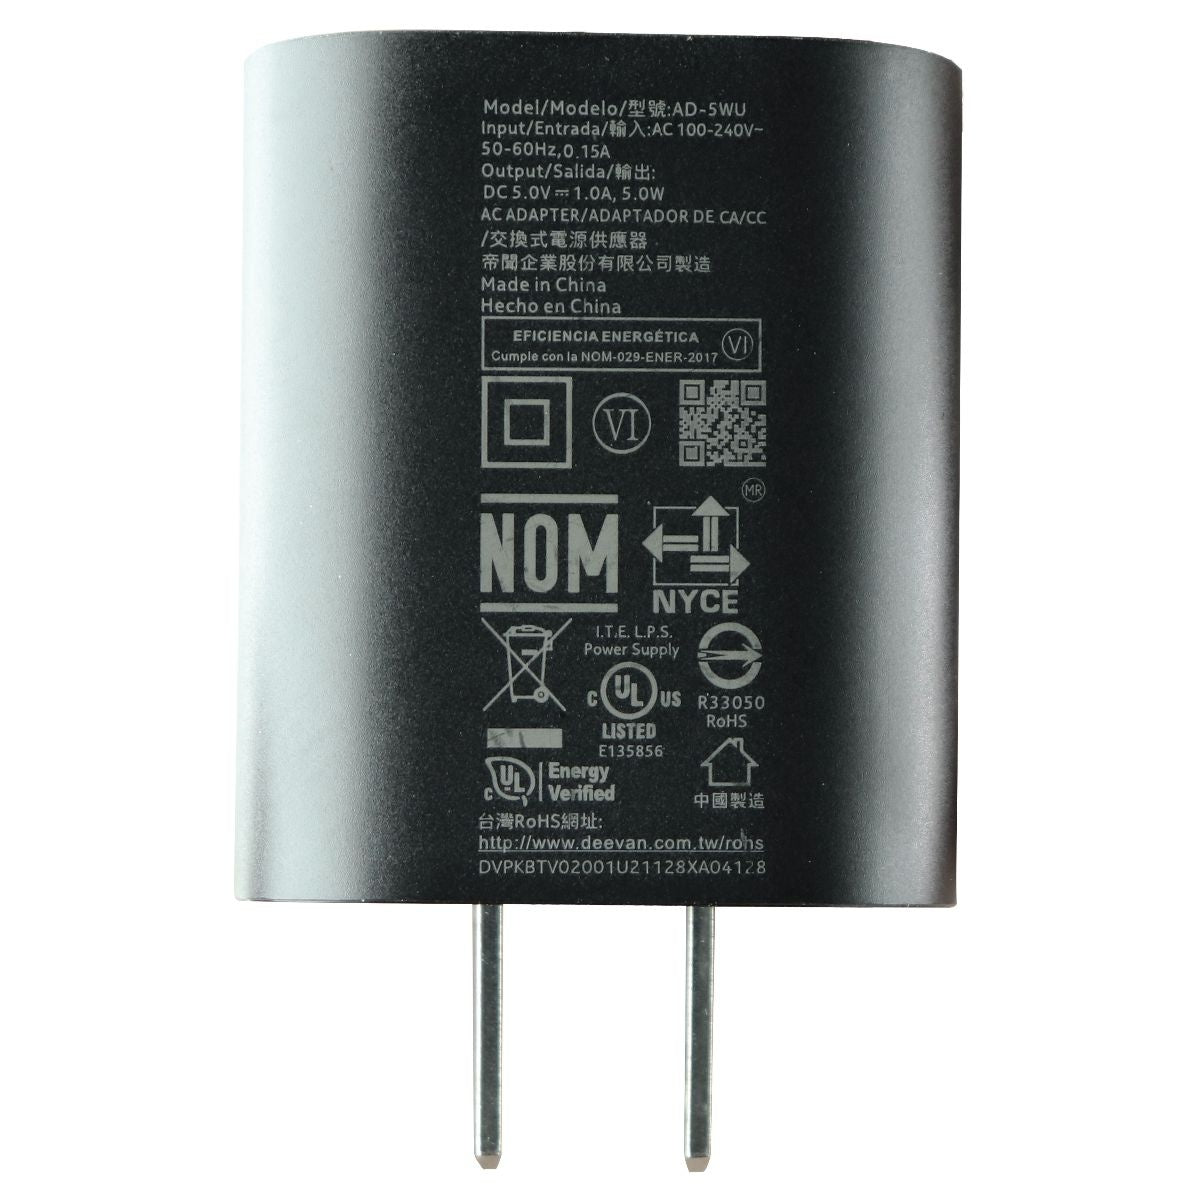 Nokia (5V/1A) Single USB Wall Charger AC Adapter - Black (AD-5WU) Cell Phone - Chargers & Cradles Nokia    - Simple Cell Bulk Wholesale Pricing - USA Seller